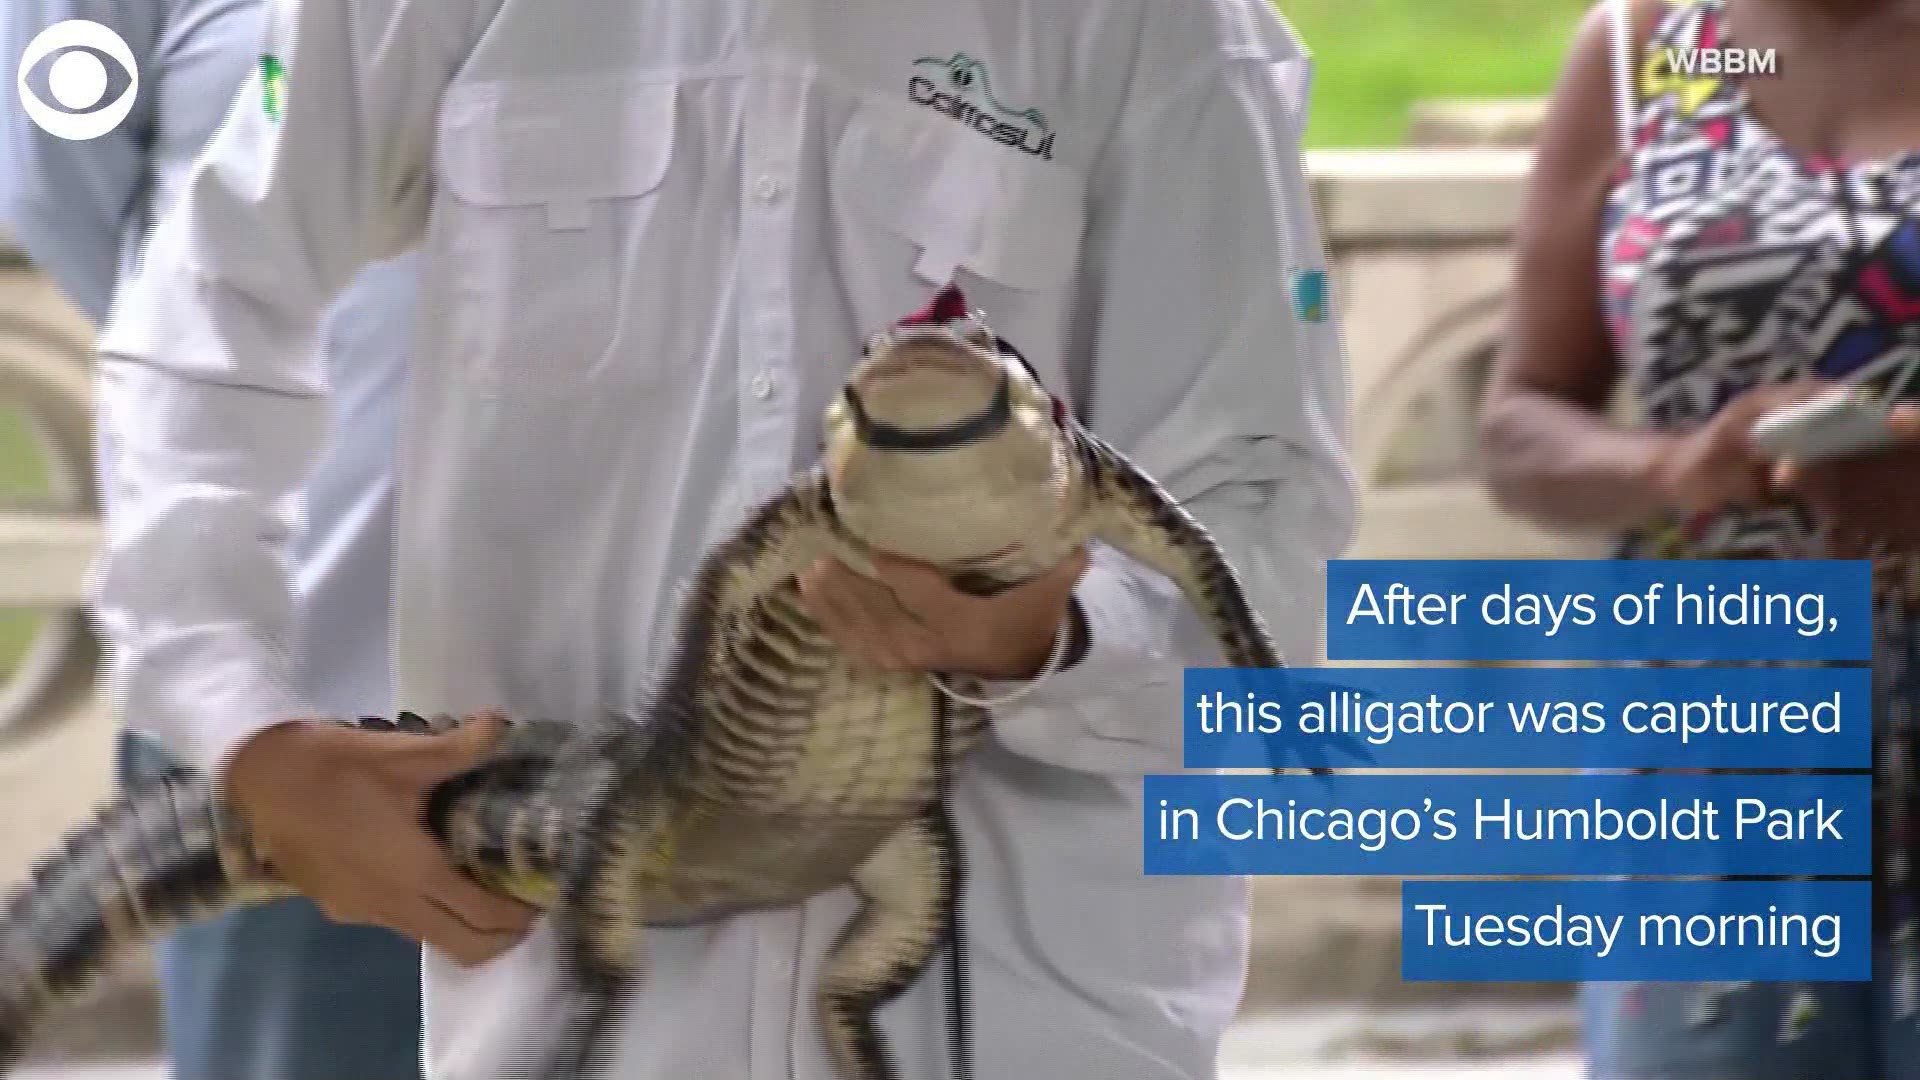 See ya later, alligator! An alligator named, “Chance the Snapper” has been finally captured in a lagoon at Chicago park.